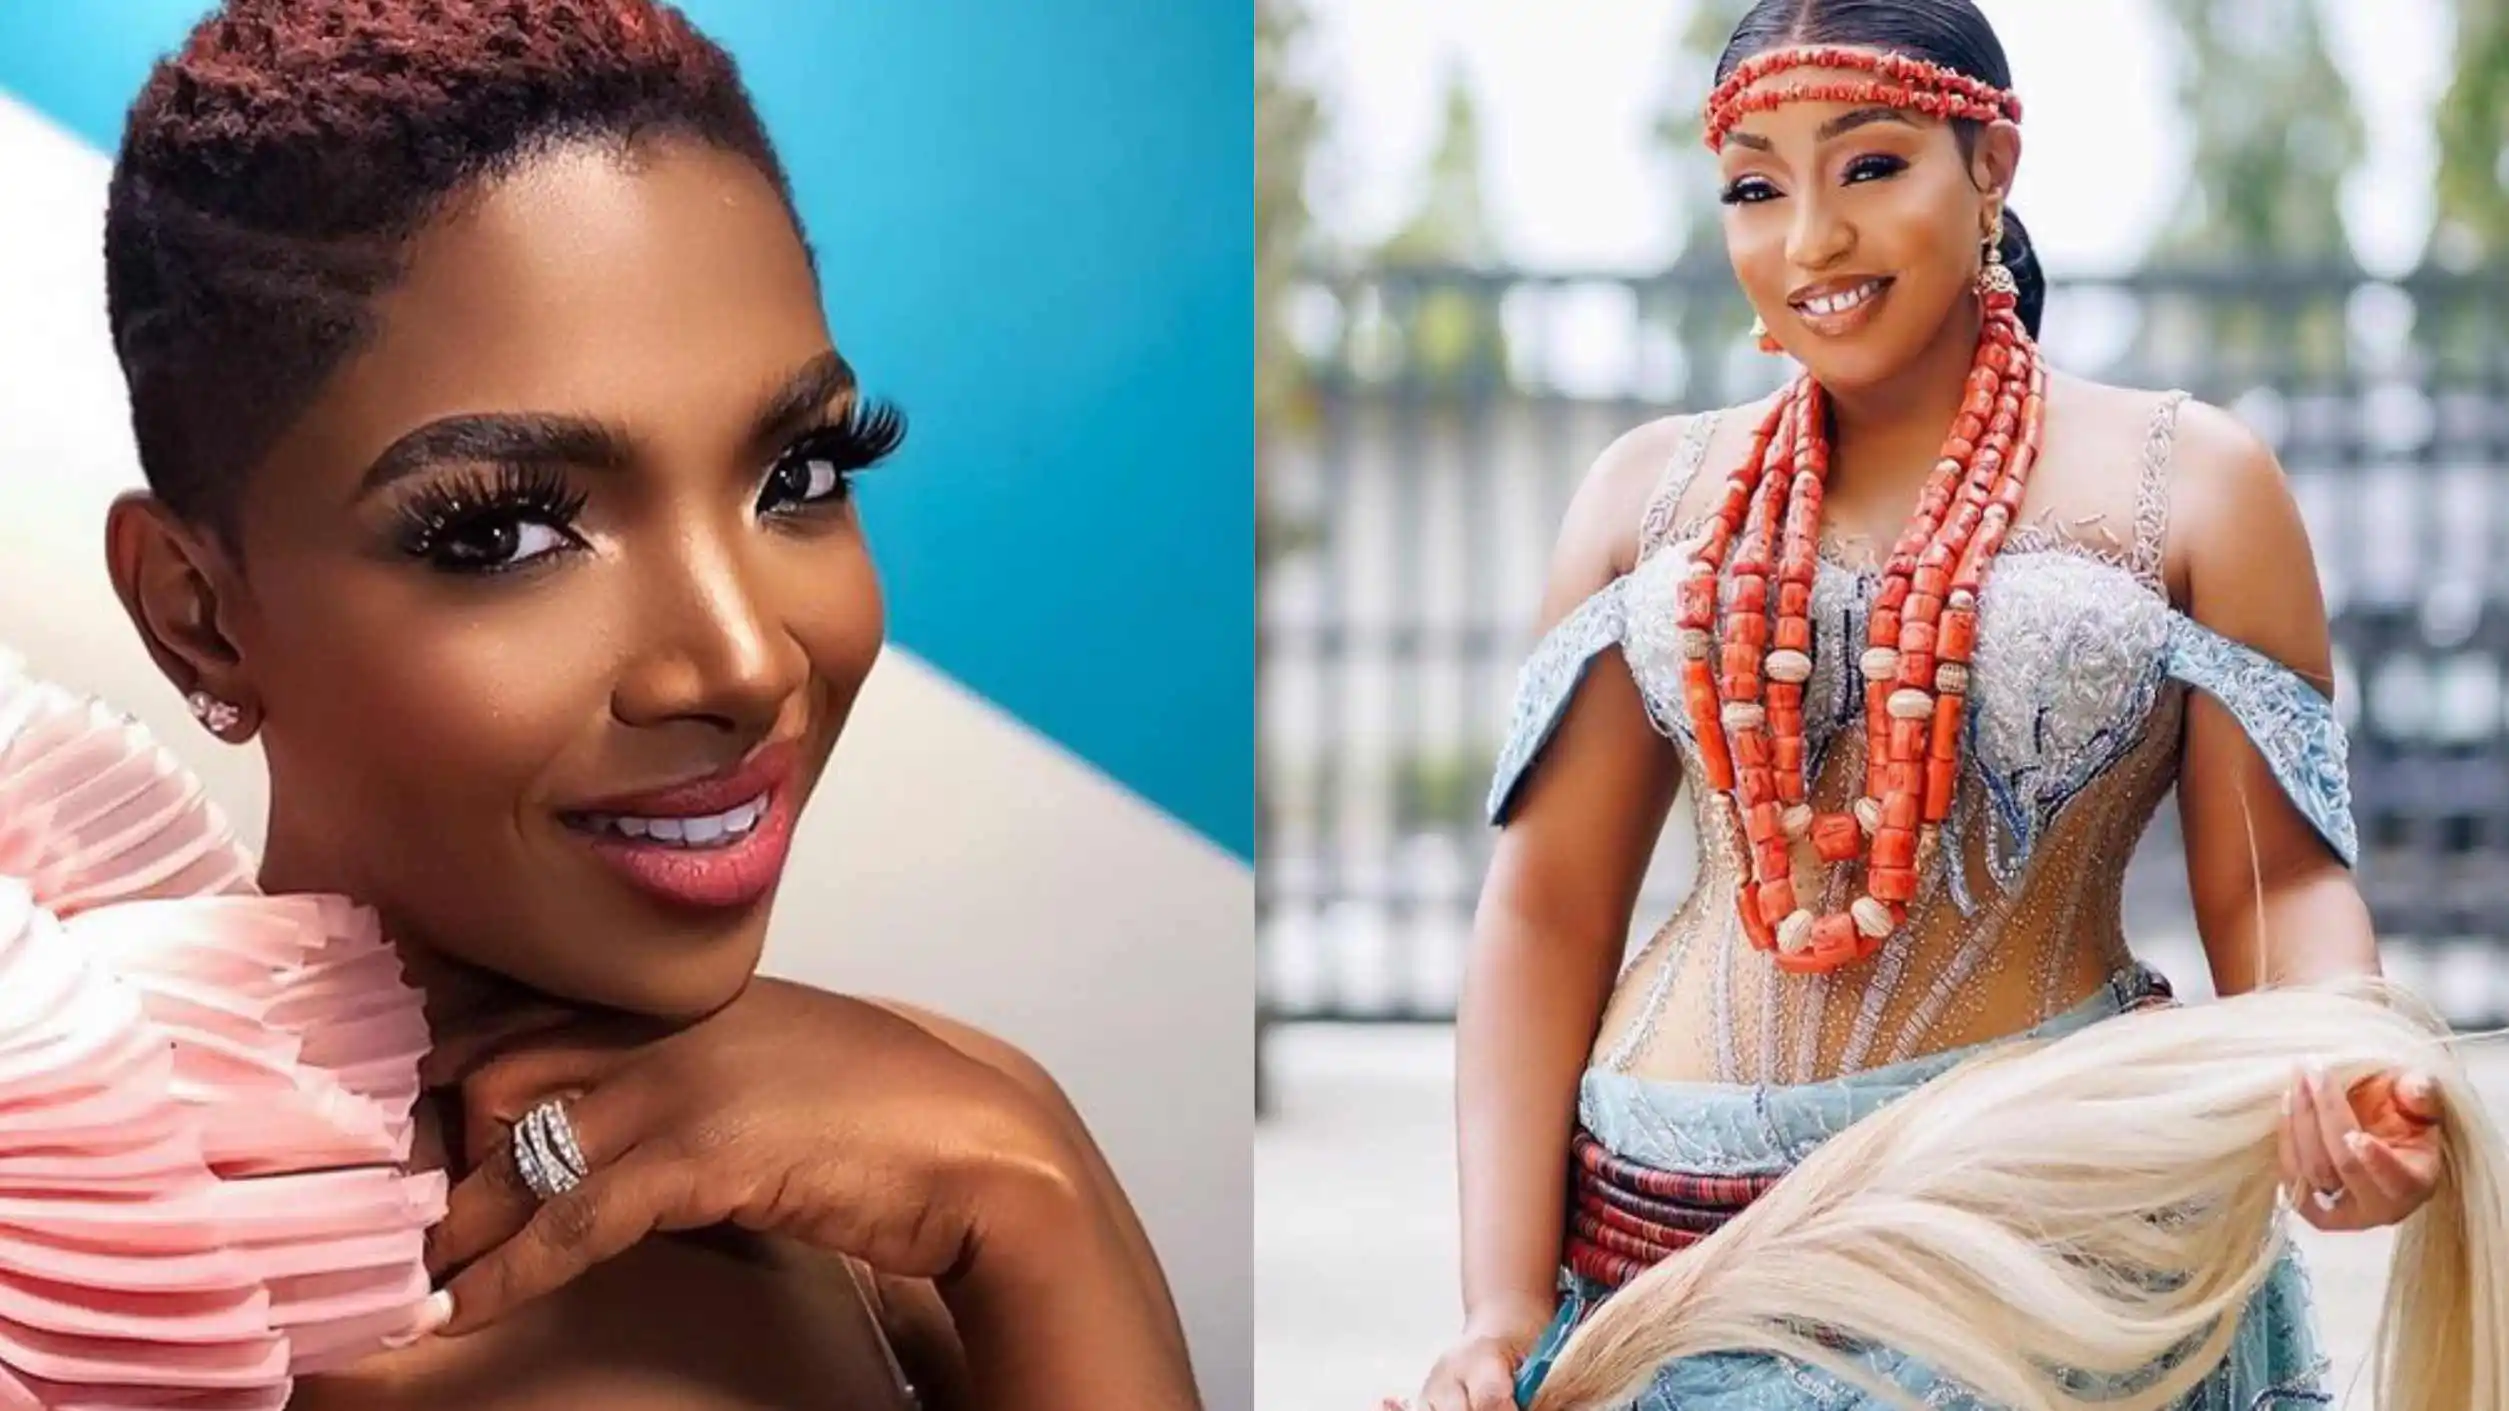 “I was shaking like a leaf about to drop off from a tree” – Annie Idibia reveals what Rita Dominic did to her some years back